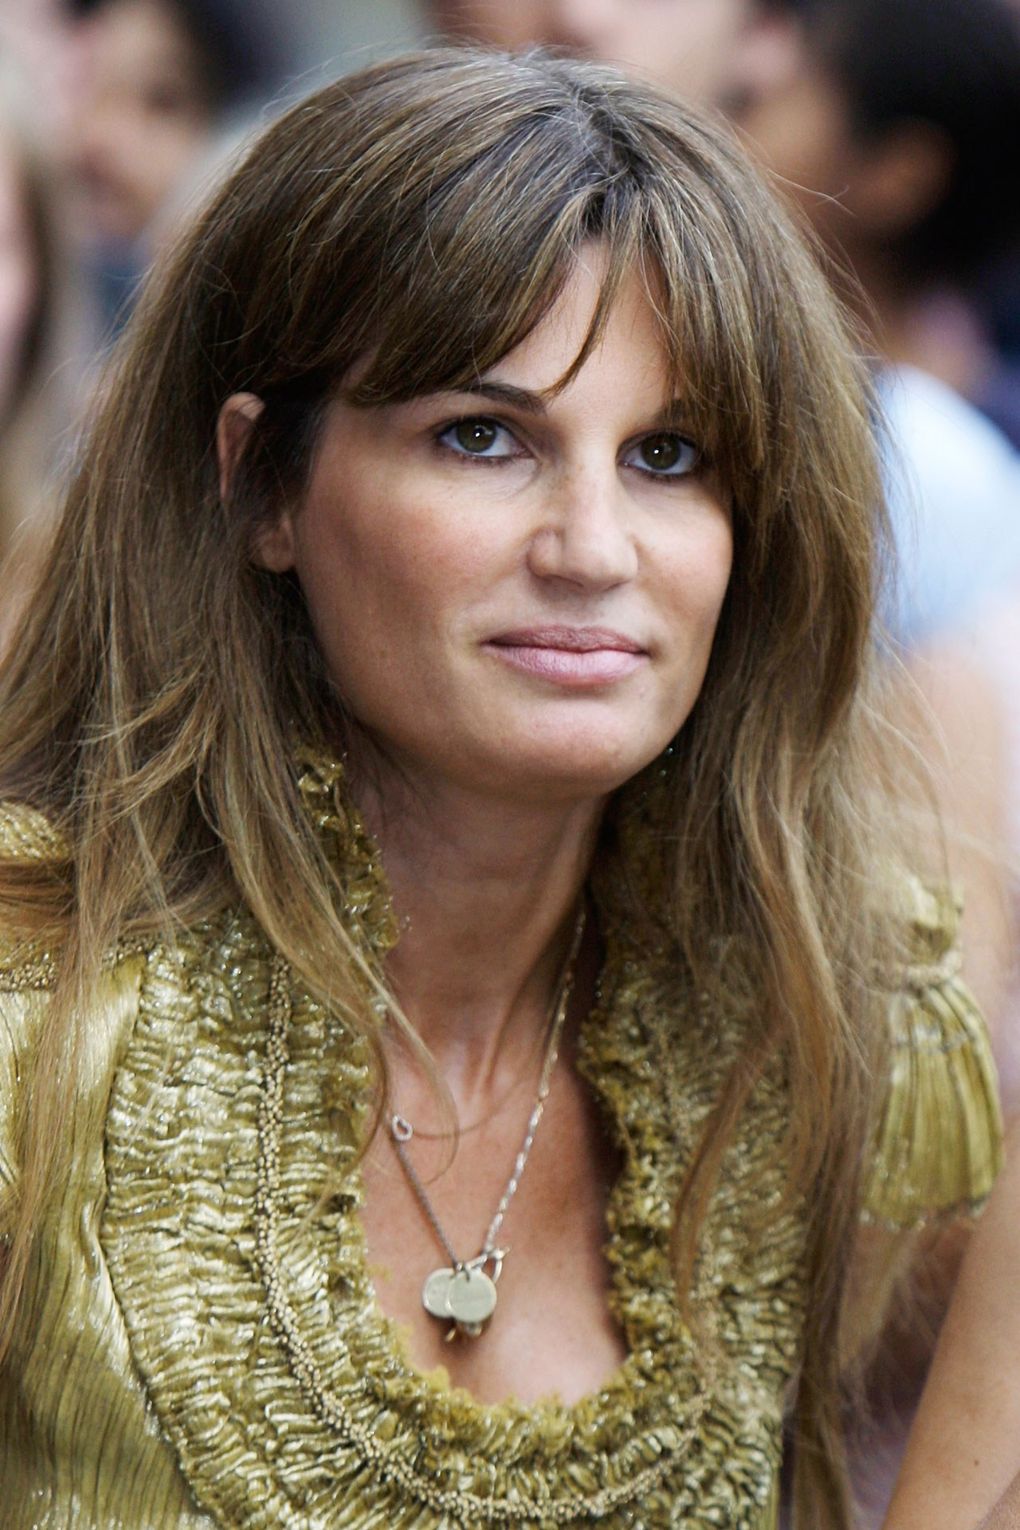 jemima goldsmith Biography, age, weight, height, friend, like, affairs, favourite, birthdate & other